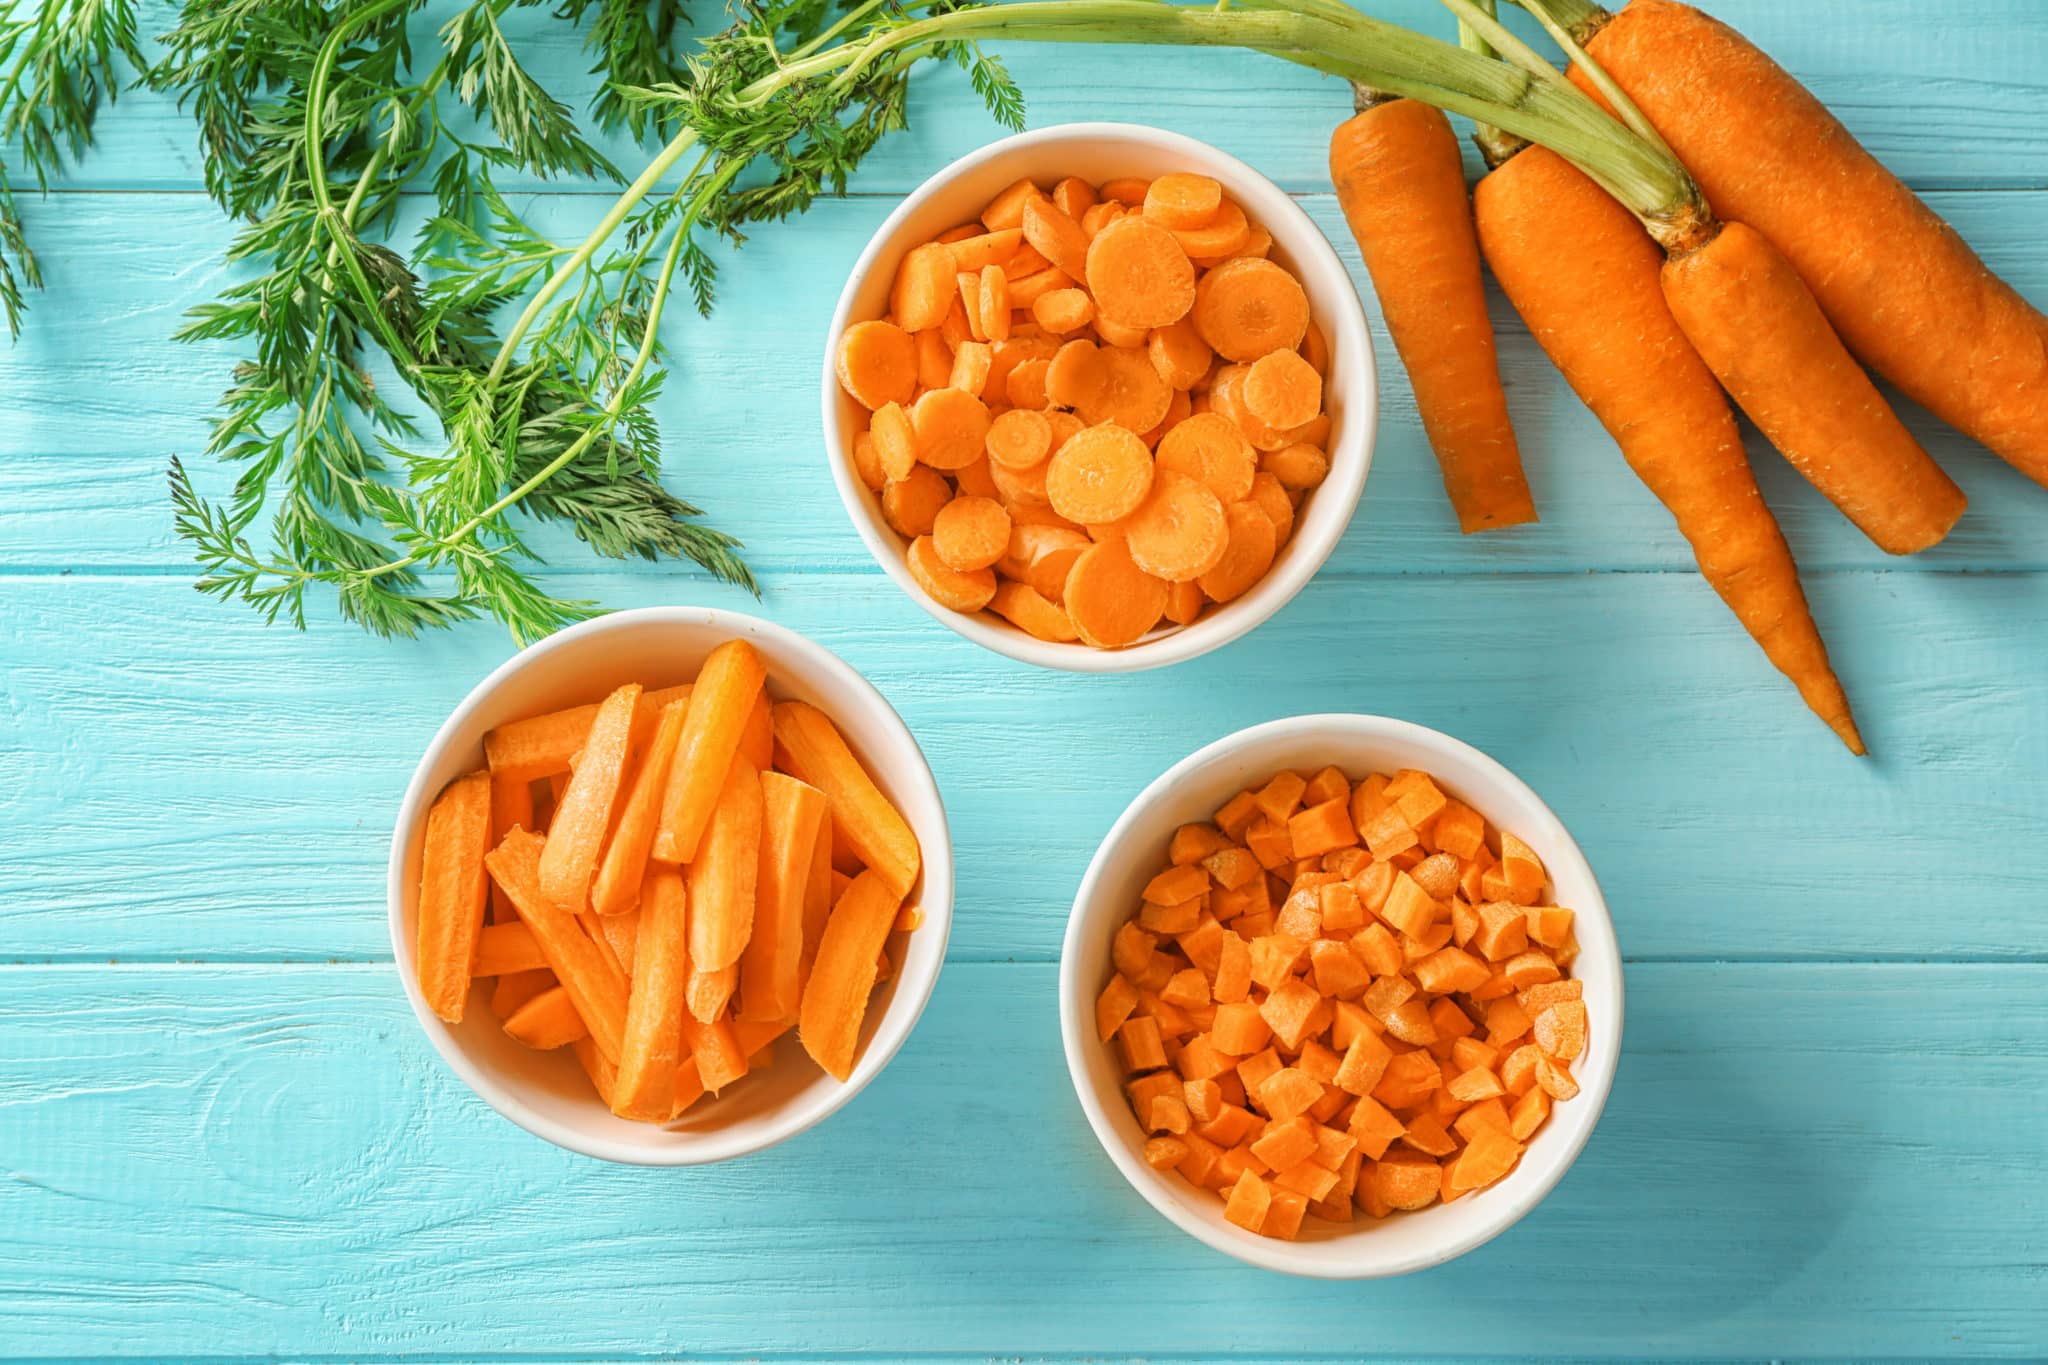 Bowls of carrots cut in different shapes on teal blue table